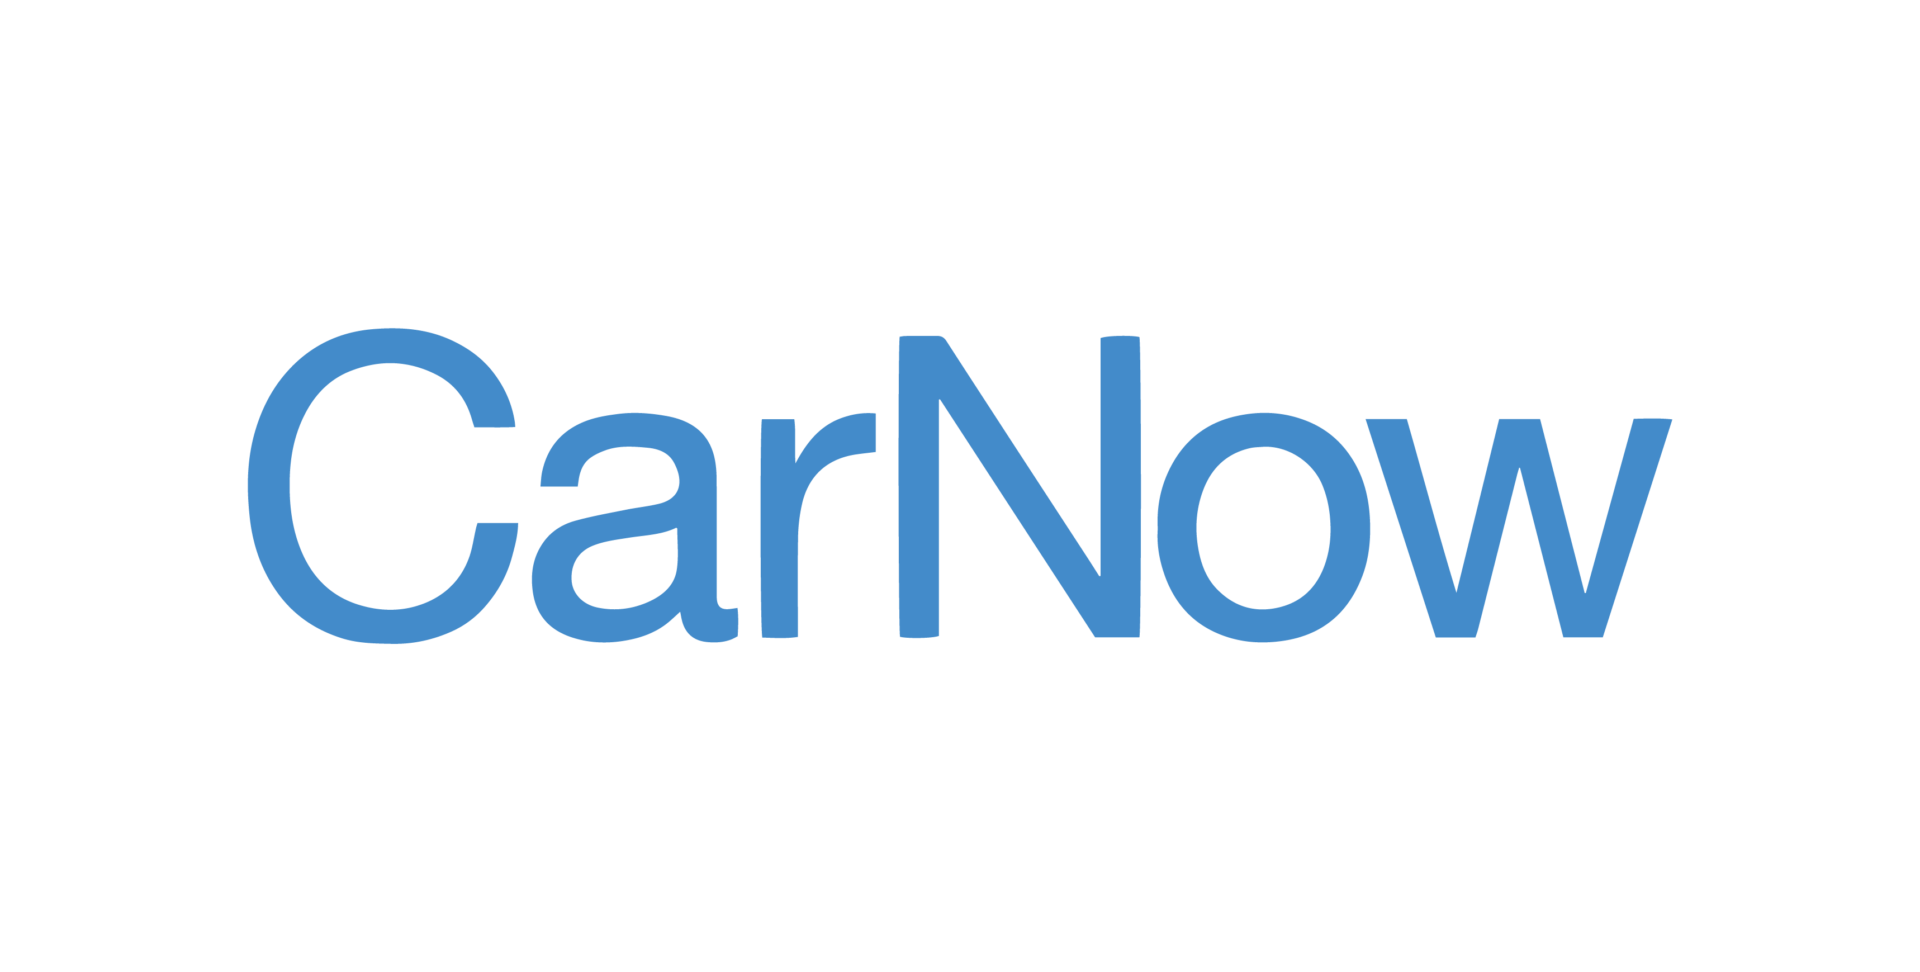 CarNow Wants to Help You Sell More Cars and Make More Money